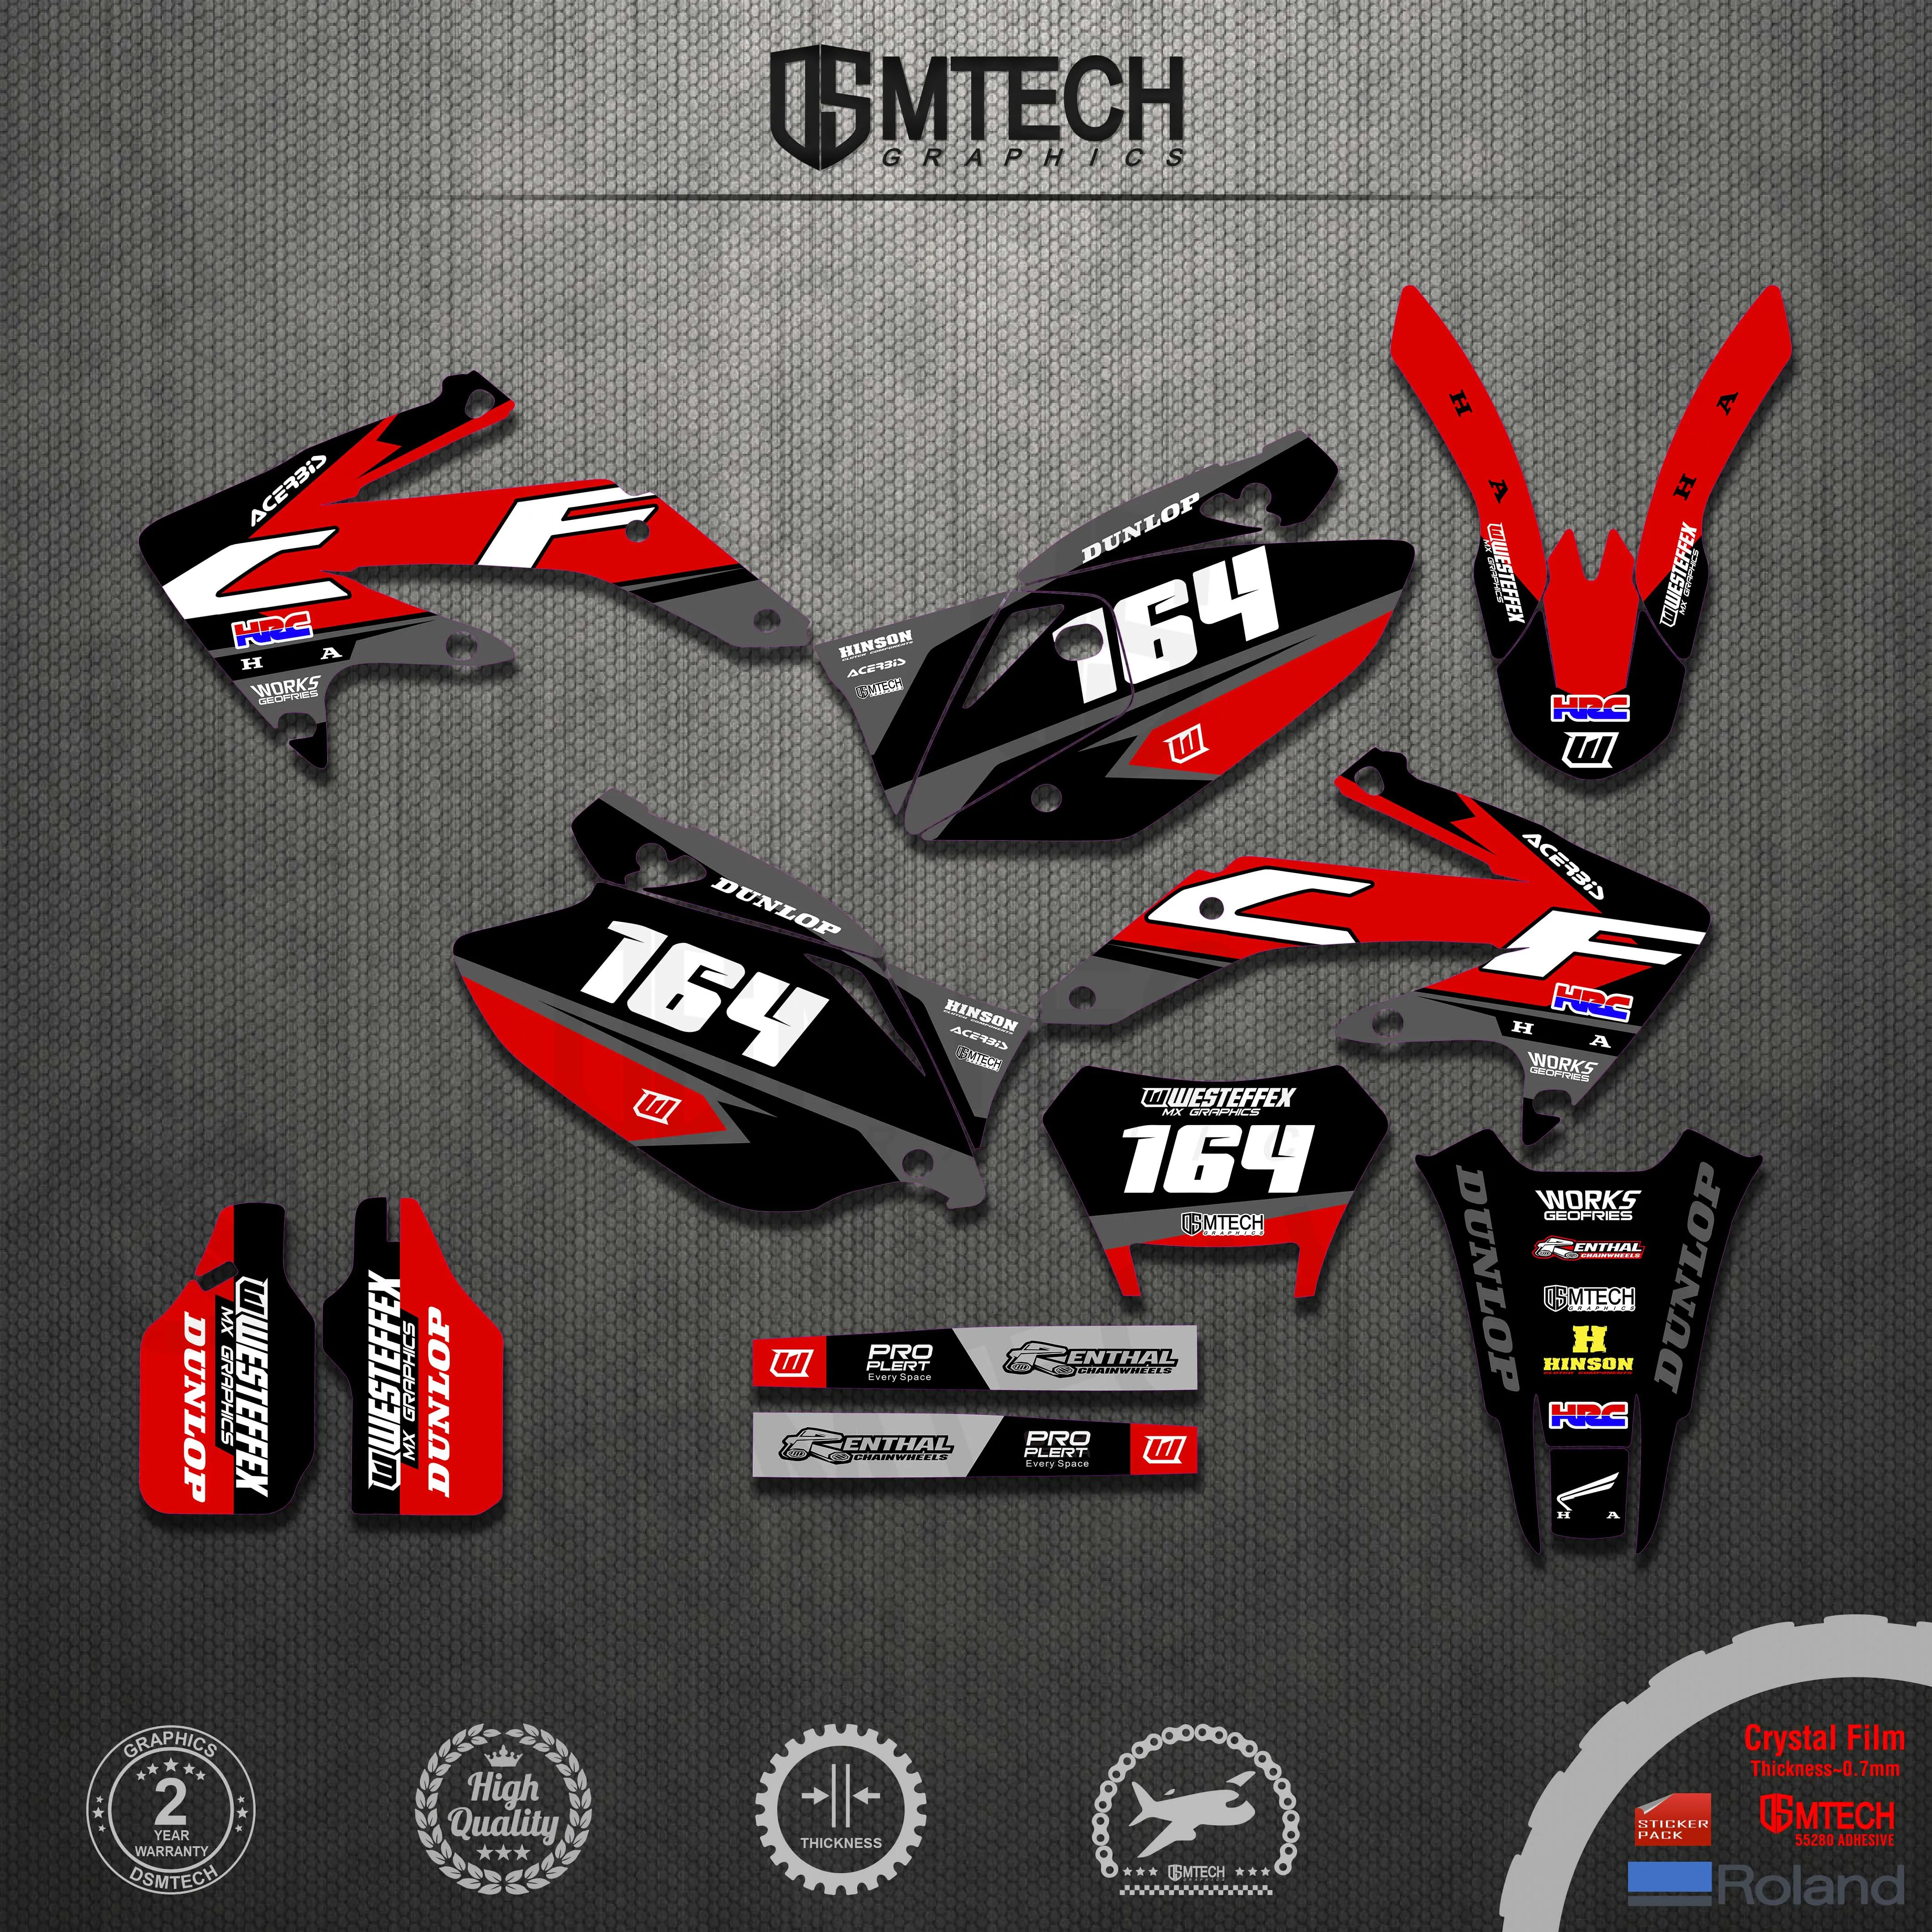 DSMTECH Motorcycle Stickers Decals Backgrounds For HONDA 2005-2007 2008 2009 2010 2011 2012 2013 2014 2015 2016-2018 CRF450X